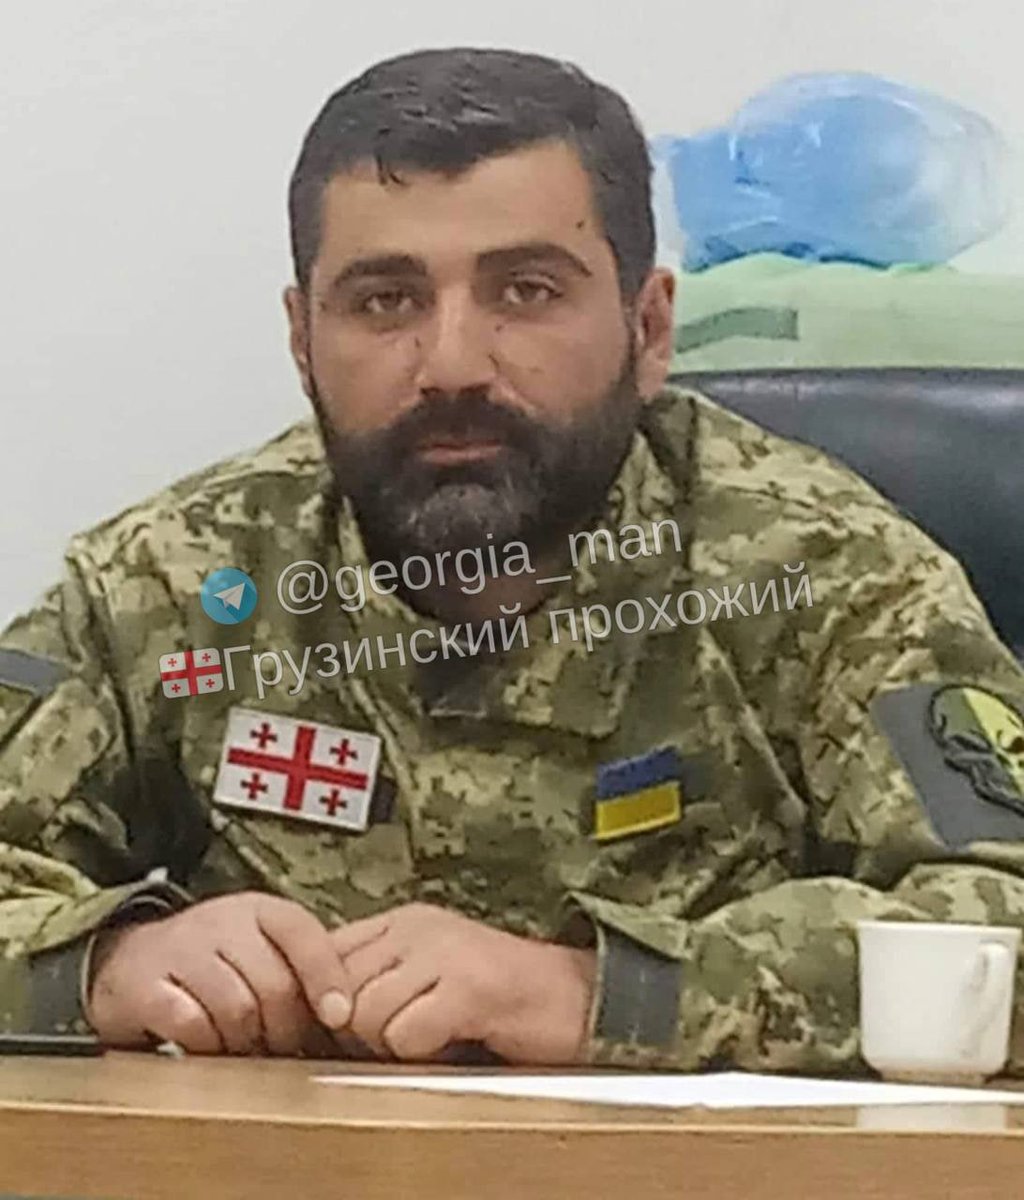 Georgian foreign fighter, Levan Sakhelashvili, was eliminated by Russian forces